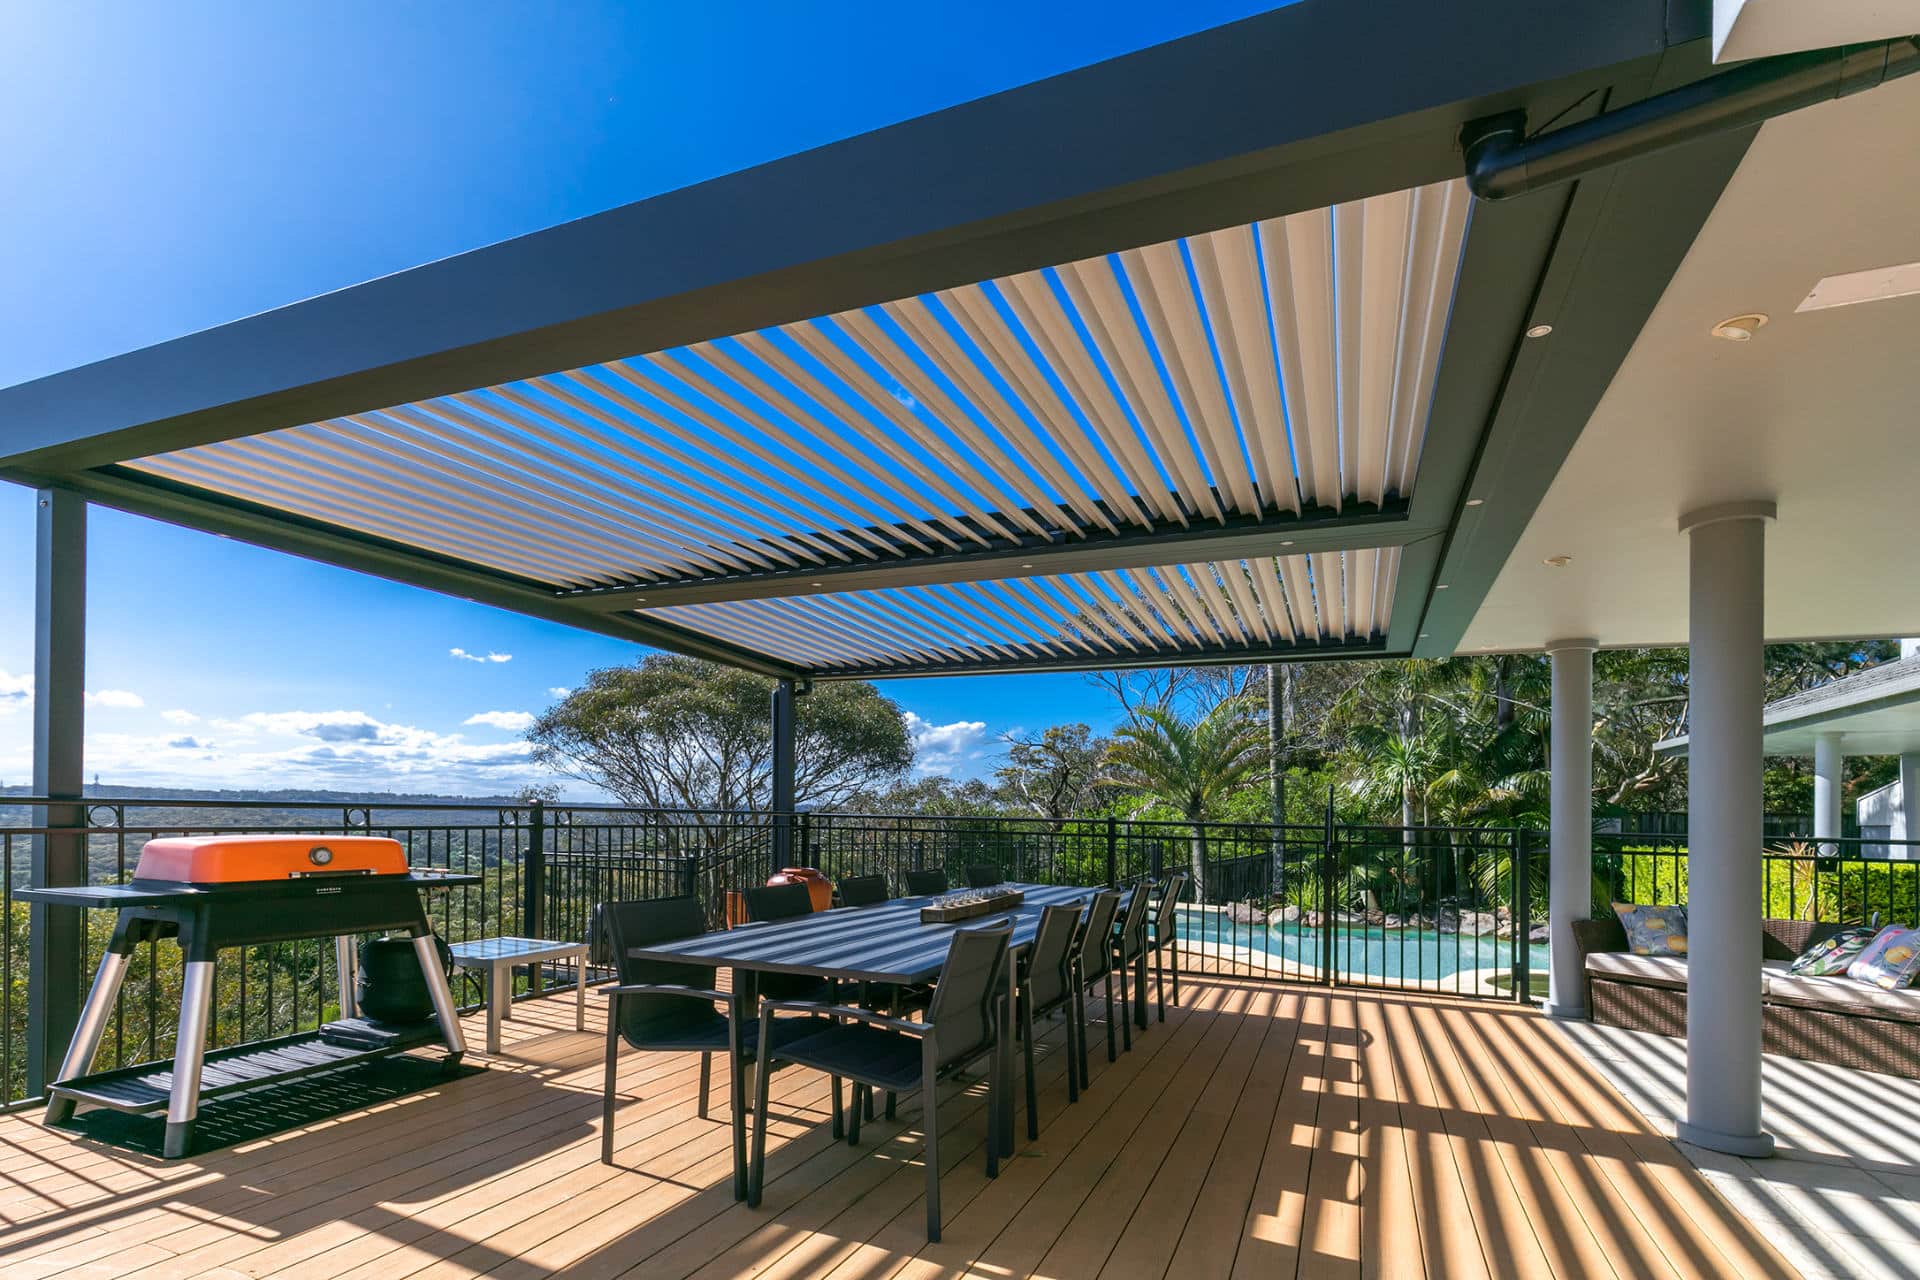 A Beacon Hill home with an up close photo of a new opening roof pergola